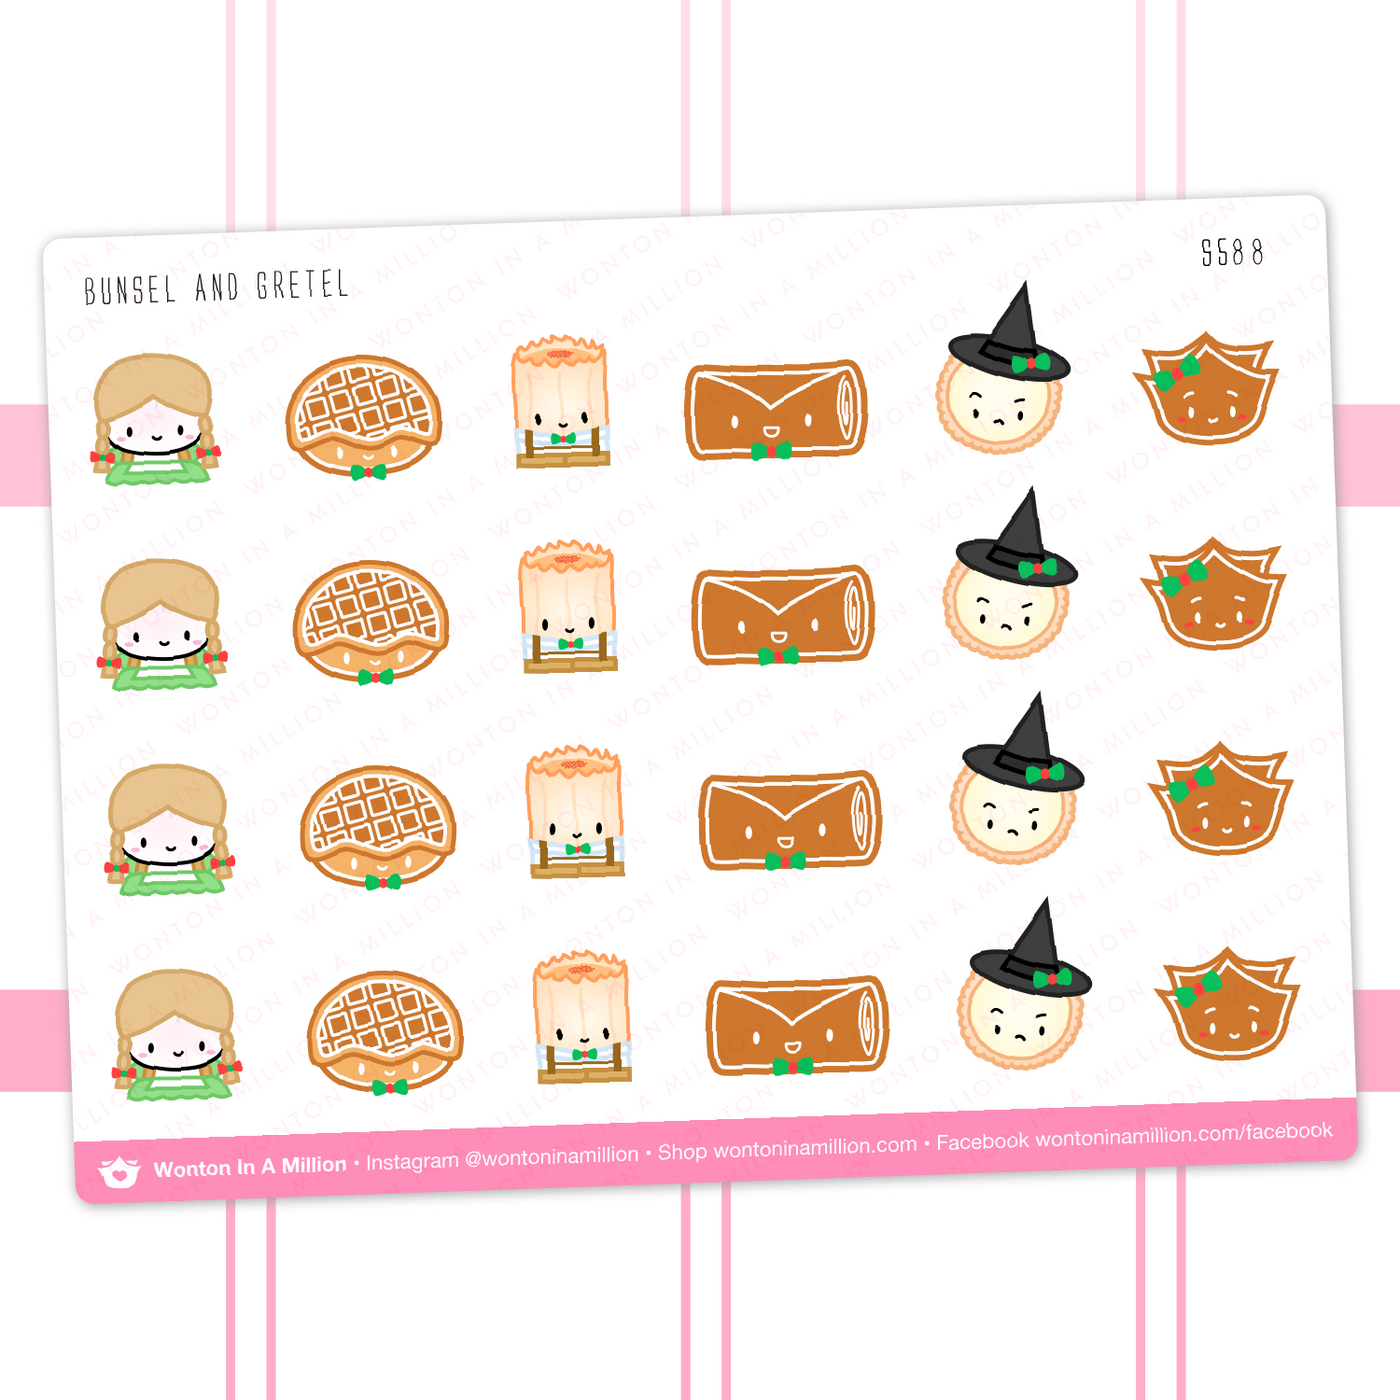 S588 | Bunsel and Gretel Stickers